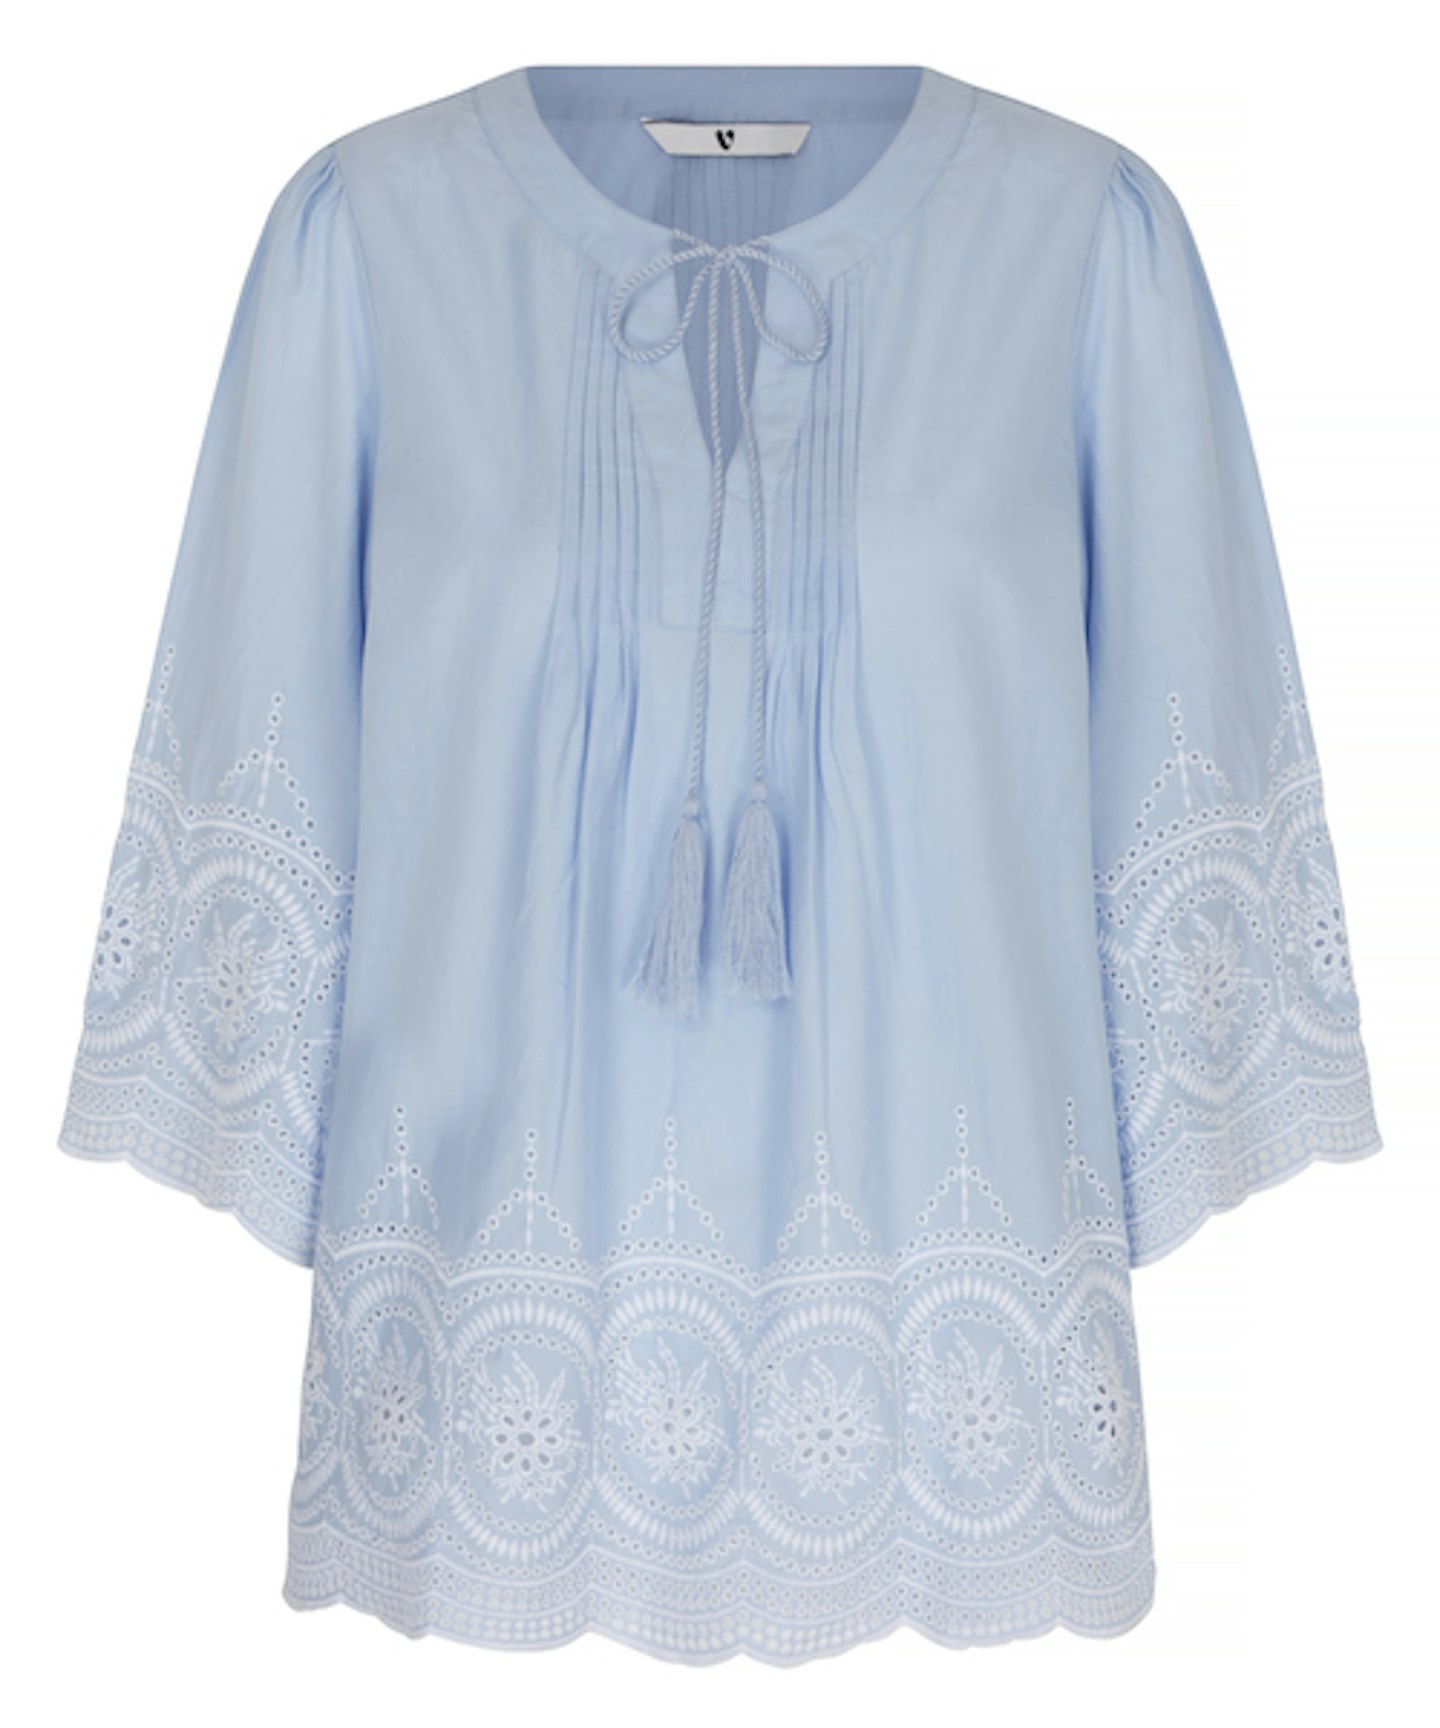 Embroidered blouse £32